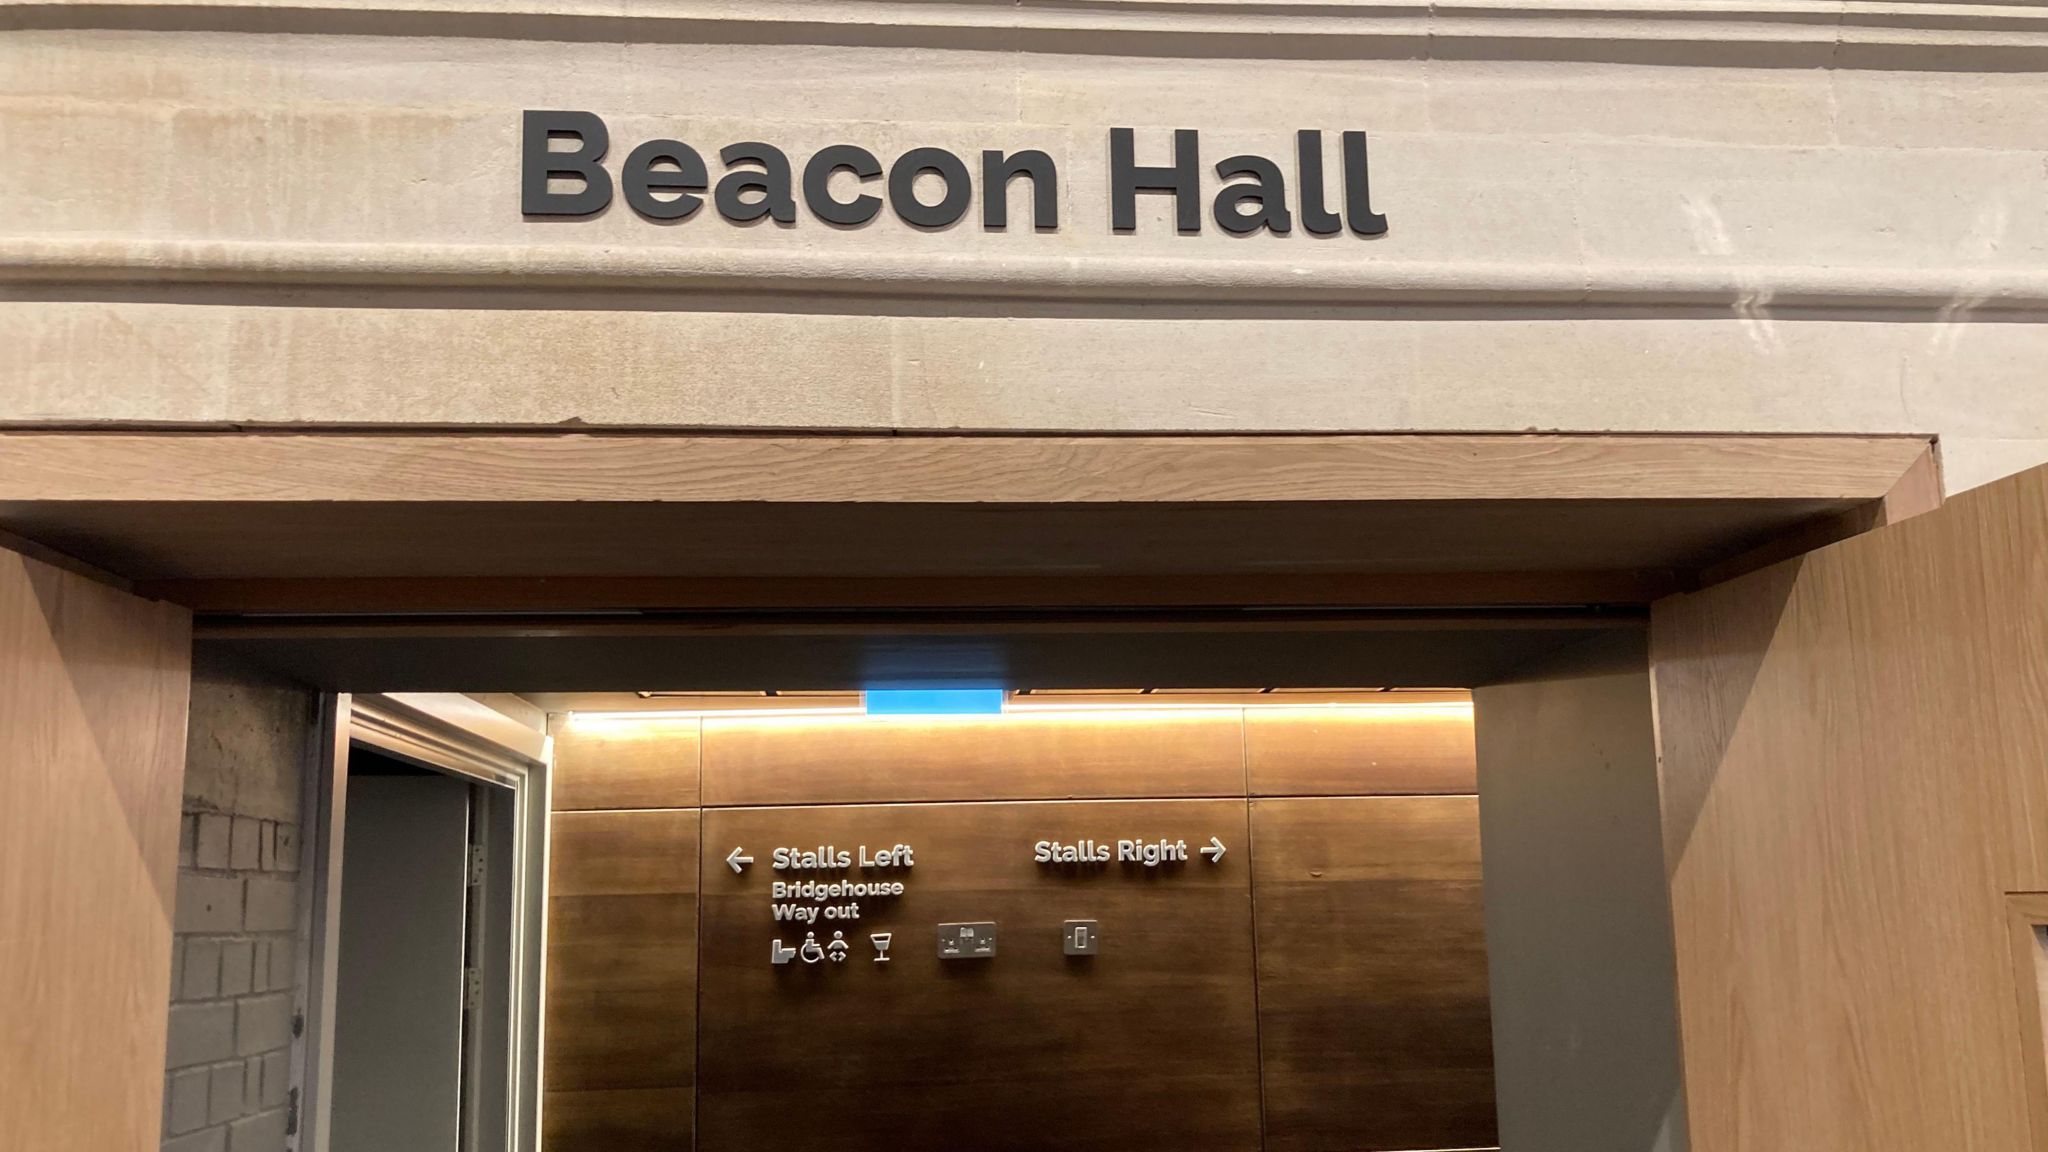 View of the Beacon Halls name above its entrance